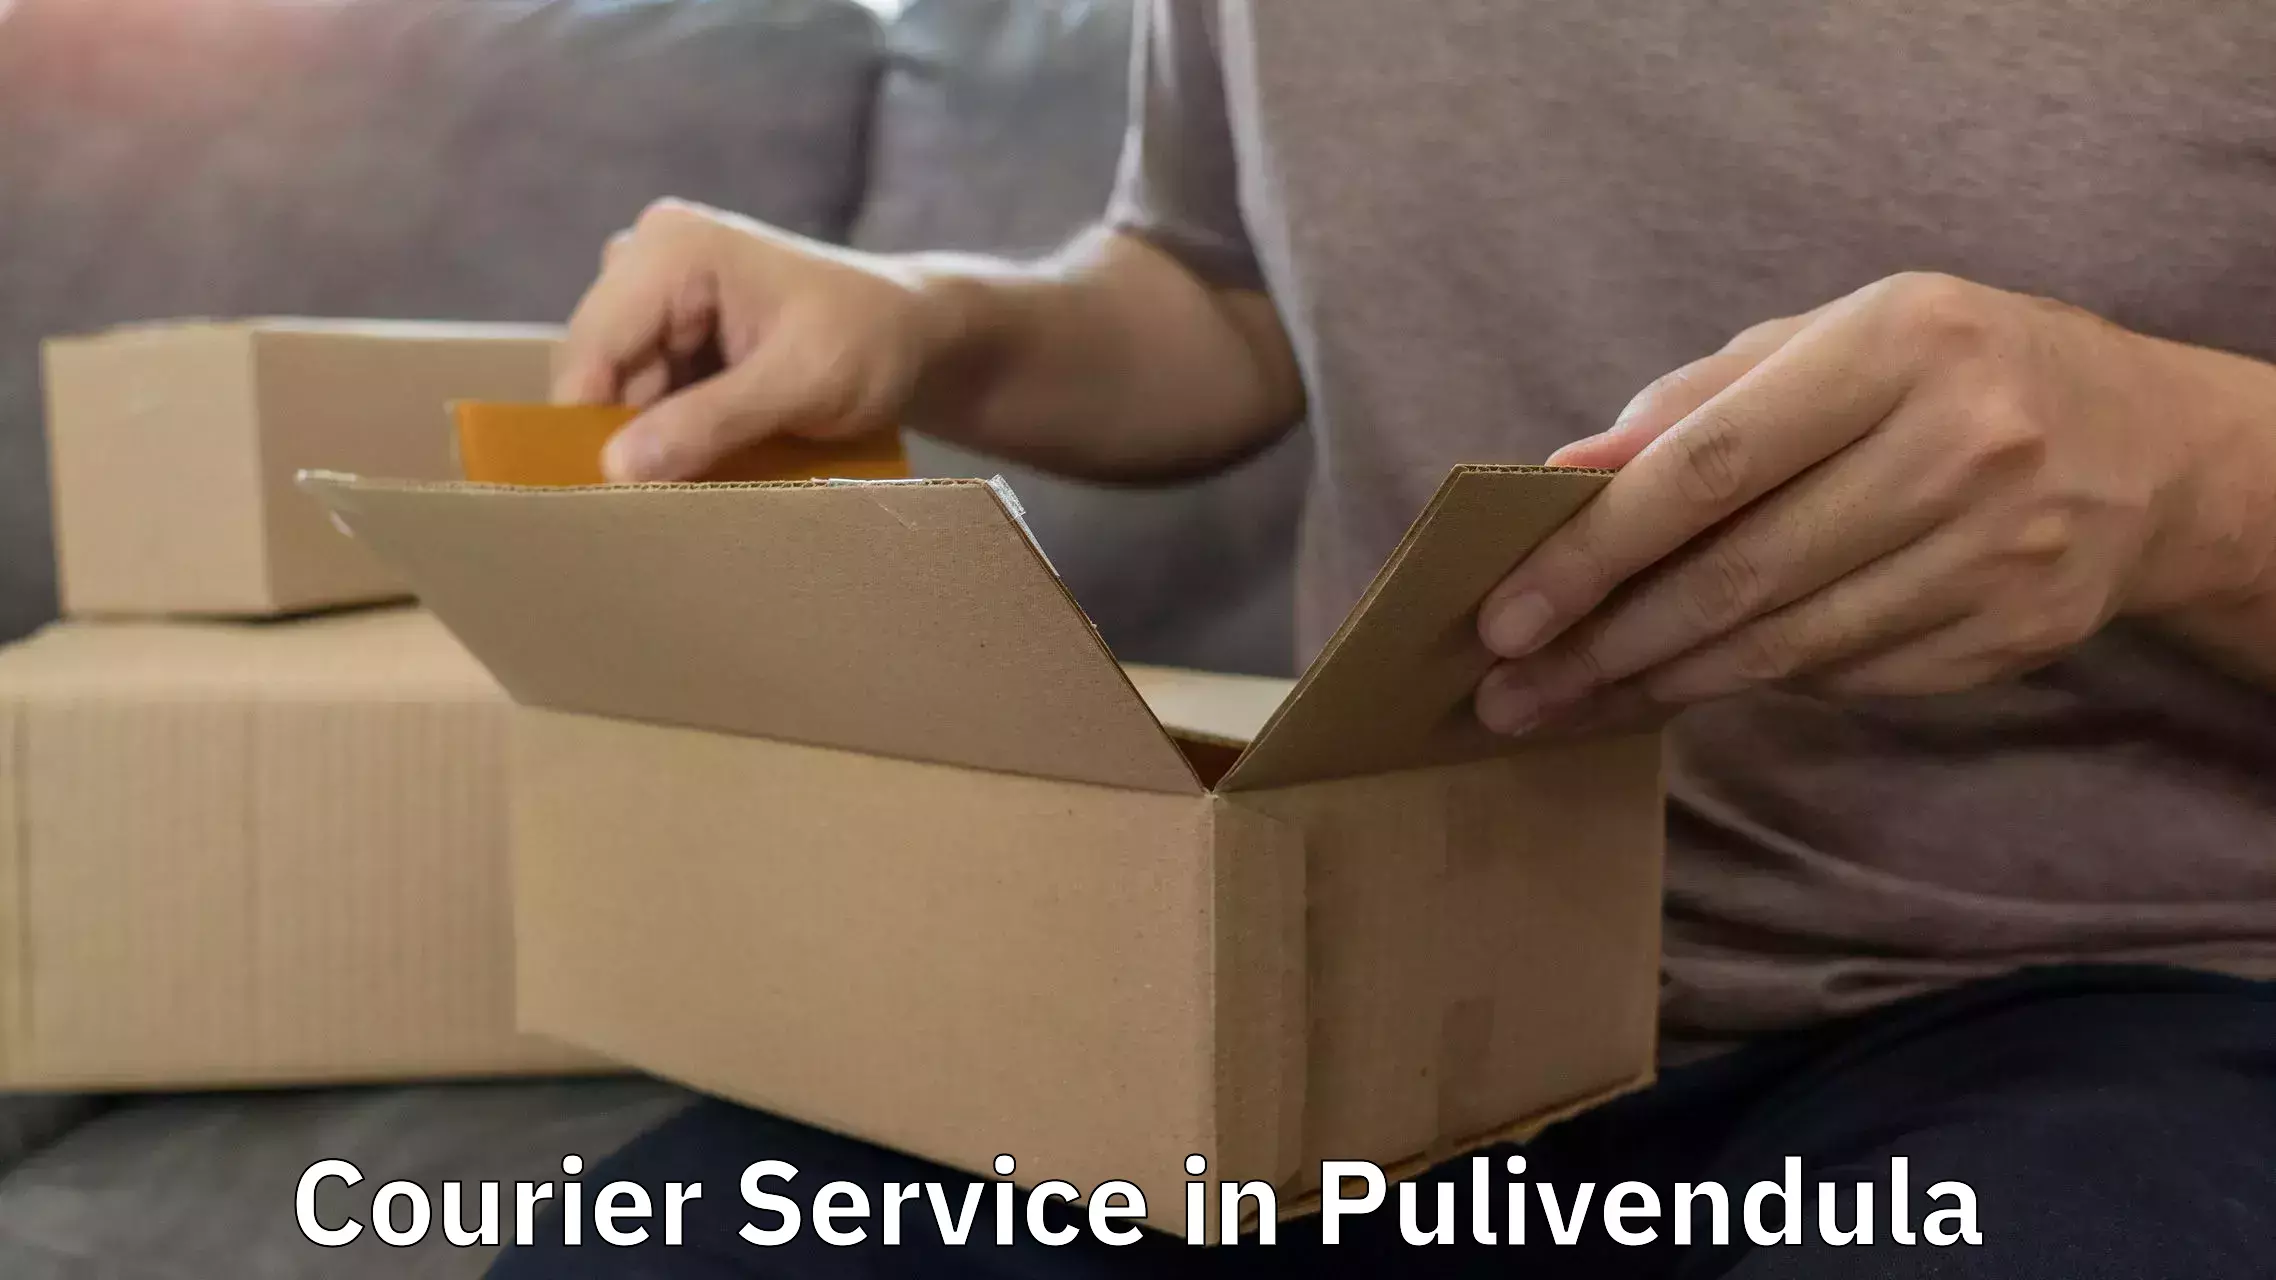 Courier service efficiency in Pulivendula